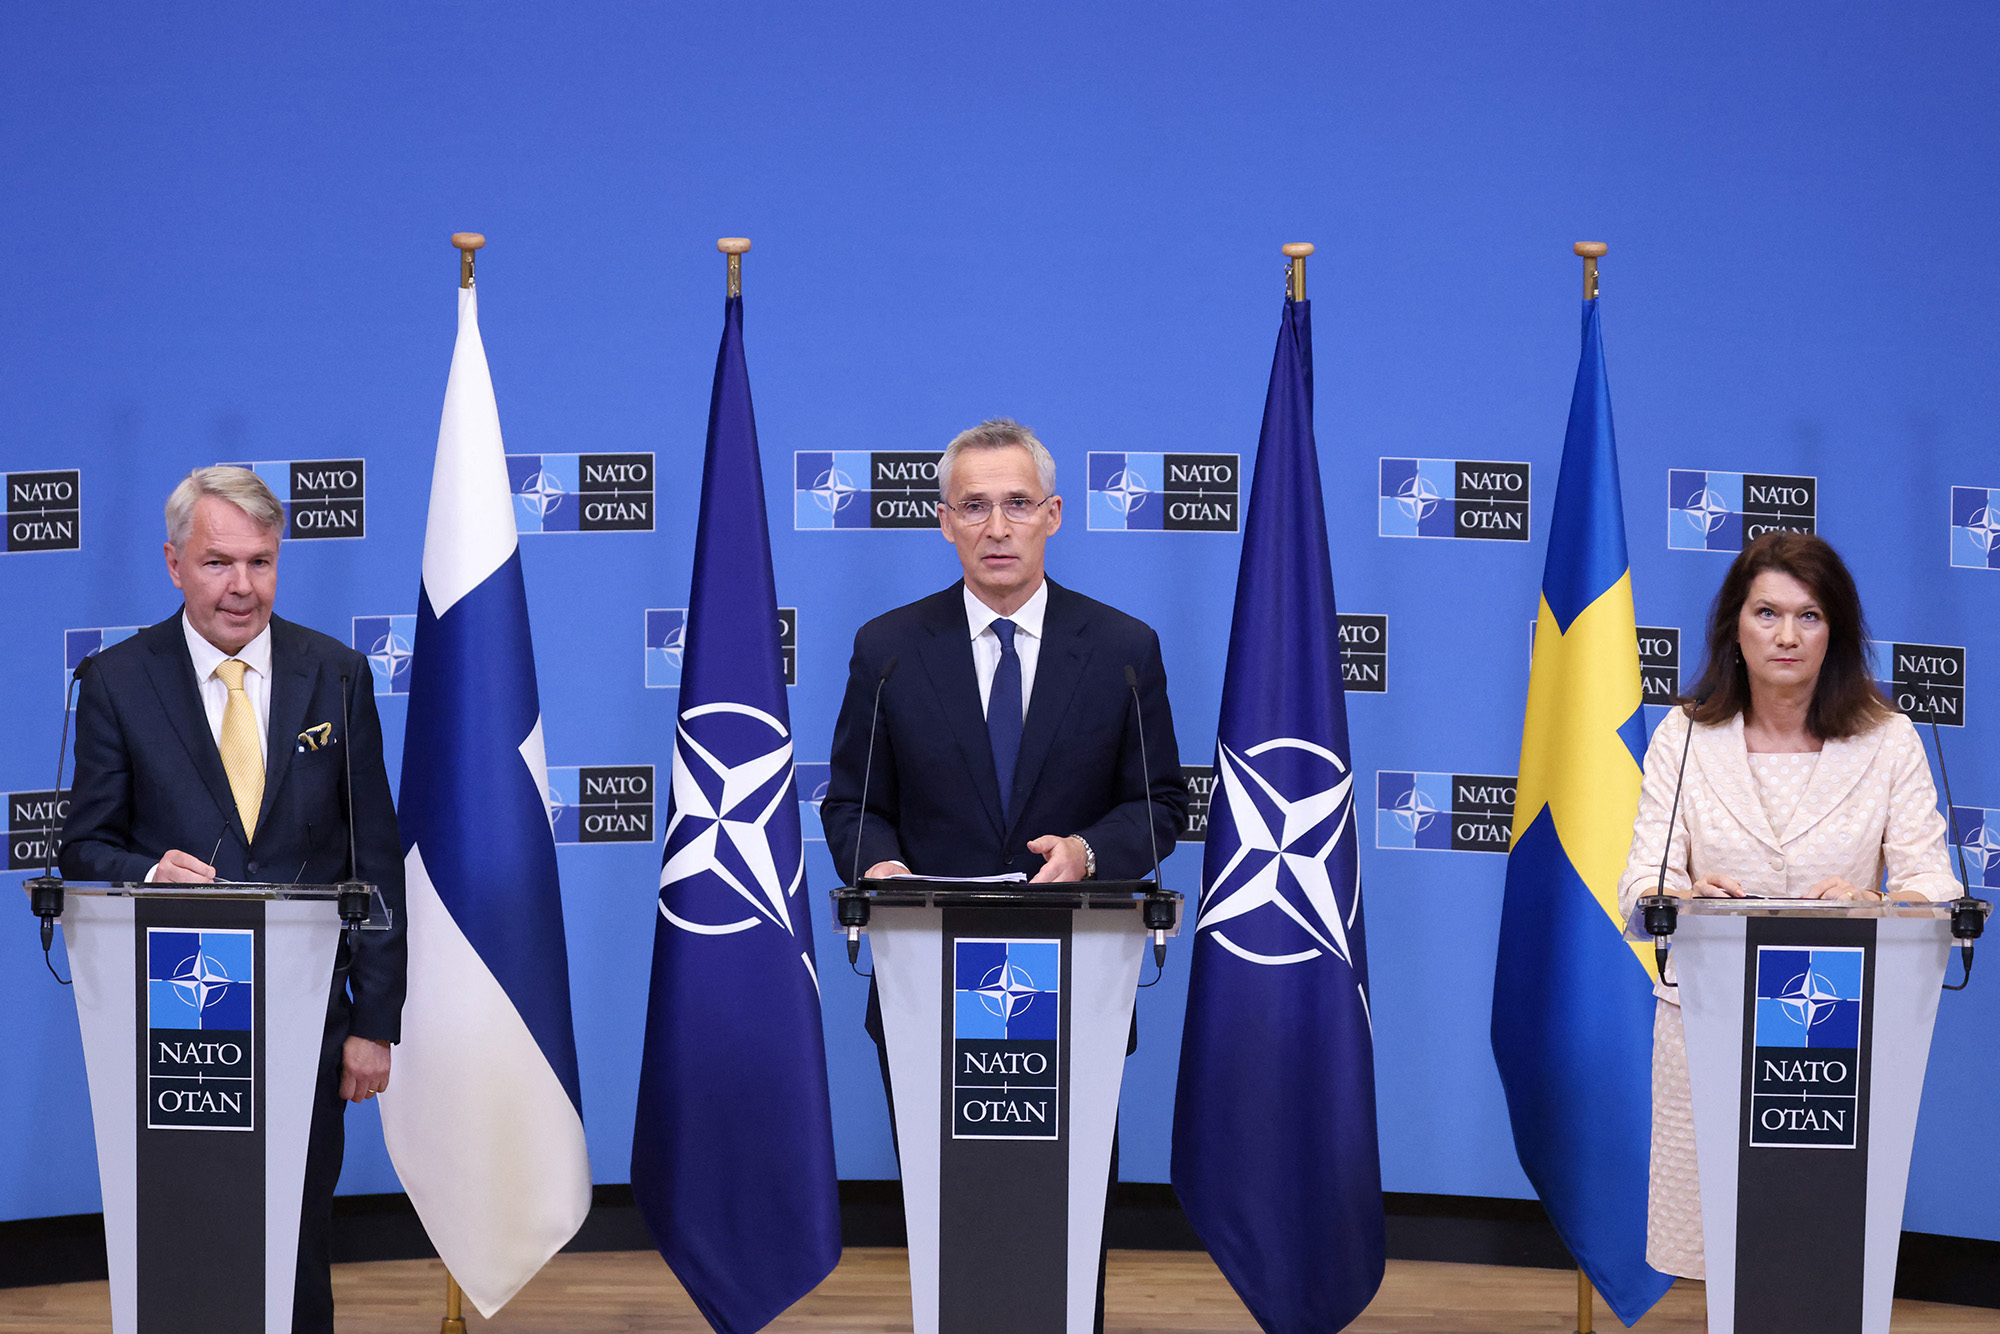 NATO is formally taking steps to ratify Sweden and Finland’s membership